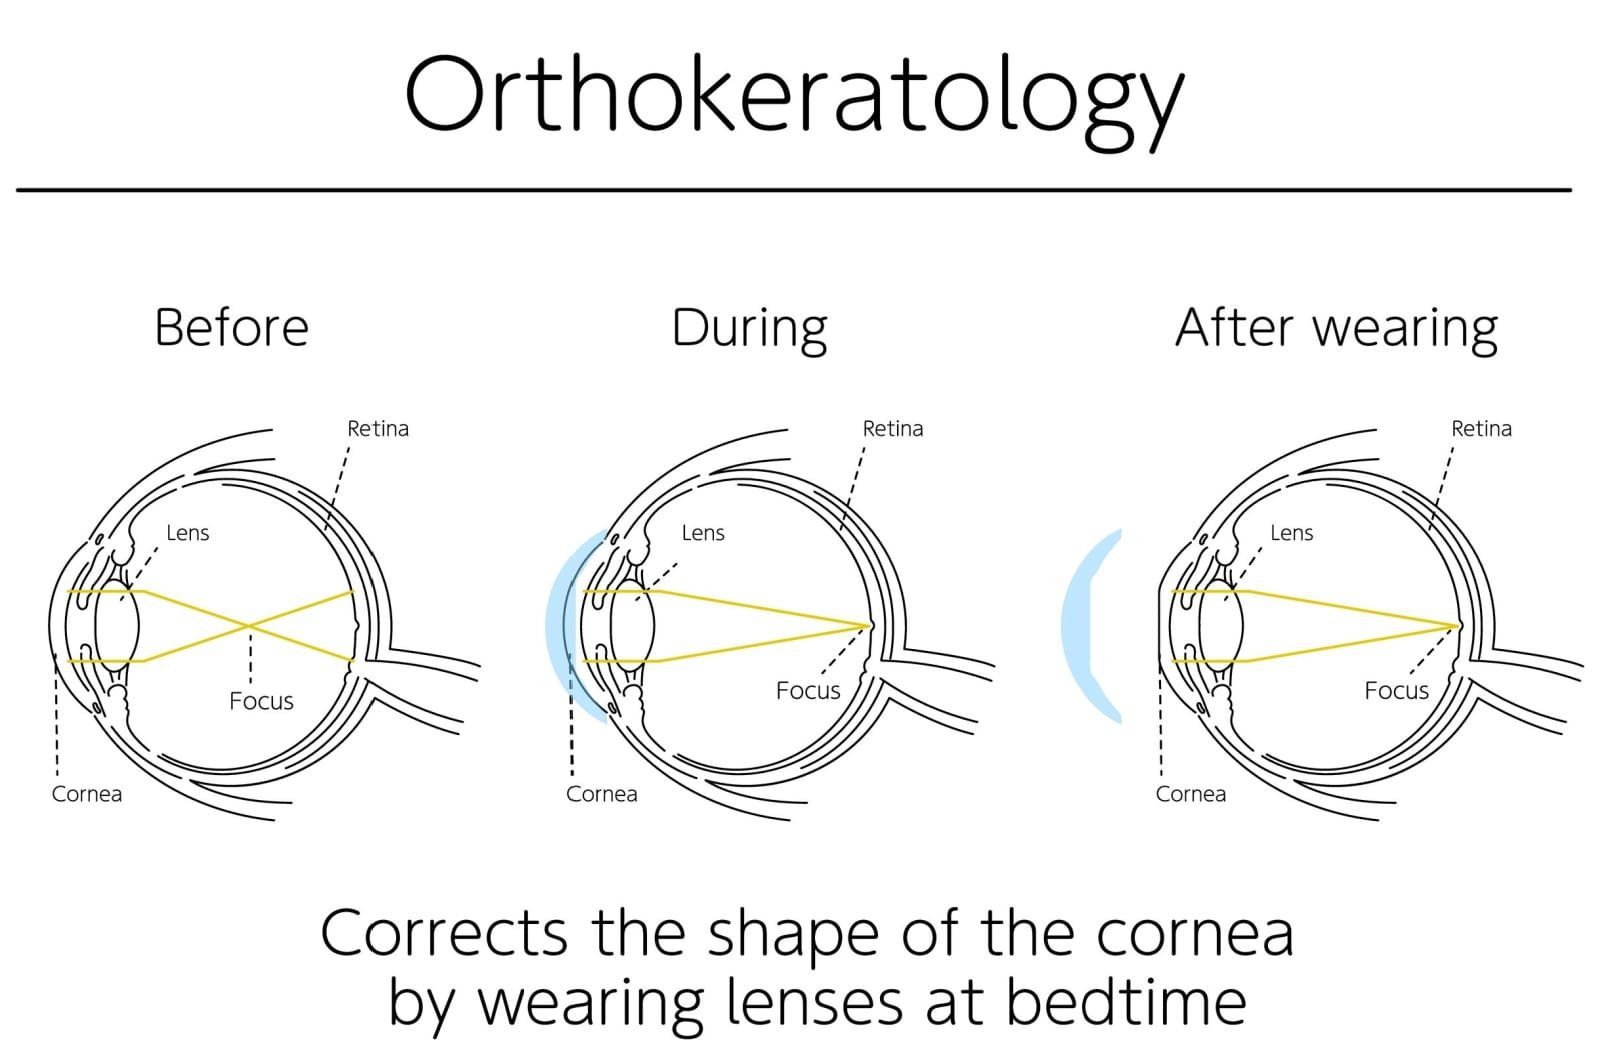 A diagram showing how ortho-k lenses can correct the shape of the cornea over time by wearing the lenses at bedtime